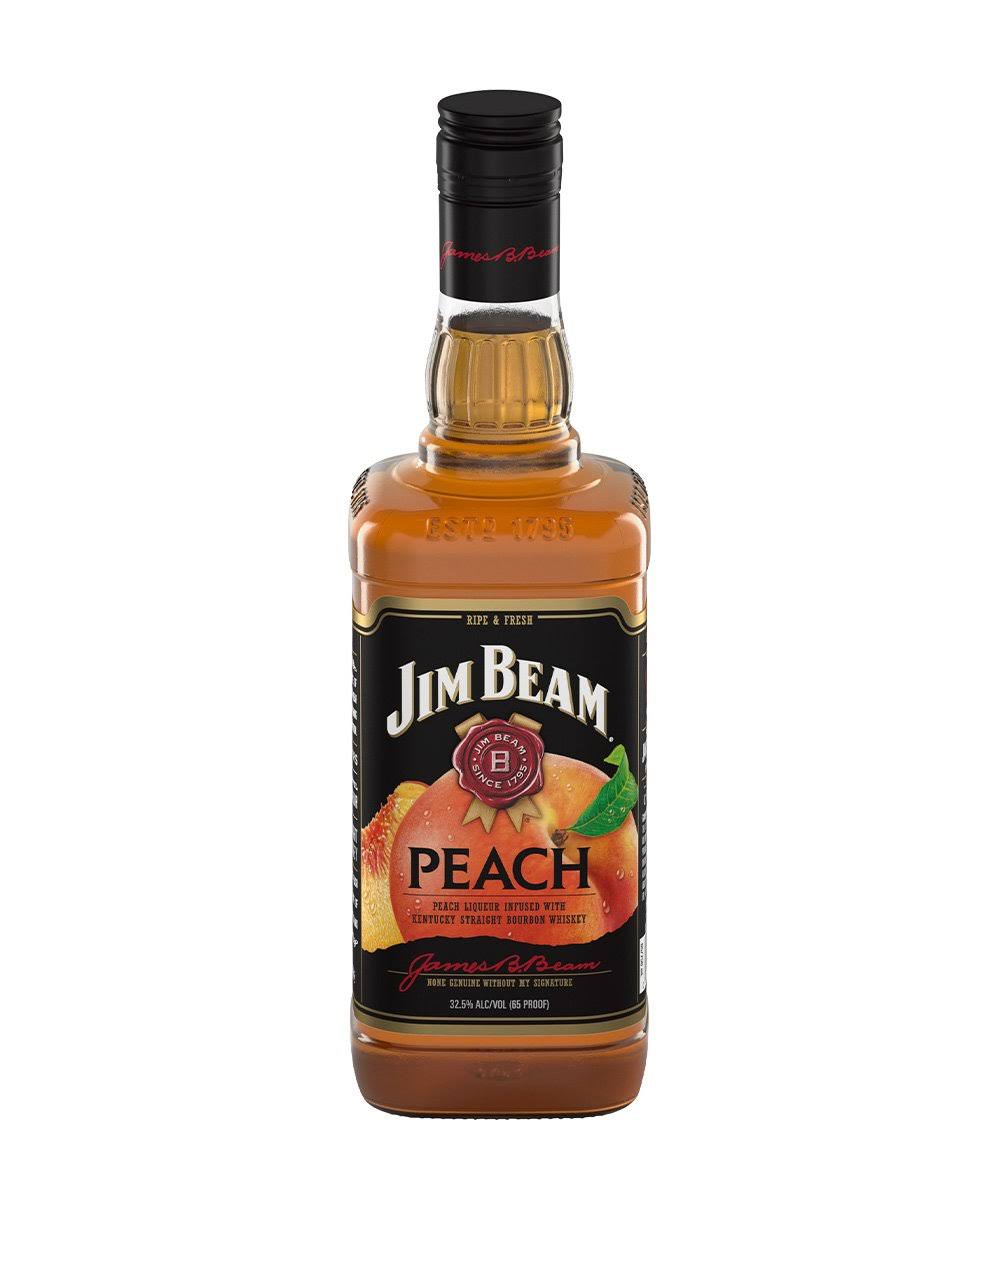 Jim Beam Bourbon Whiskey, Peach Liqueur Infused, with Kentucky Straight